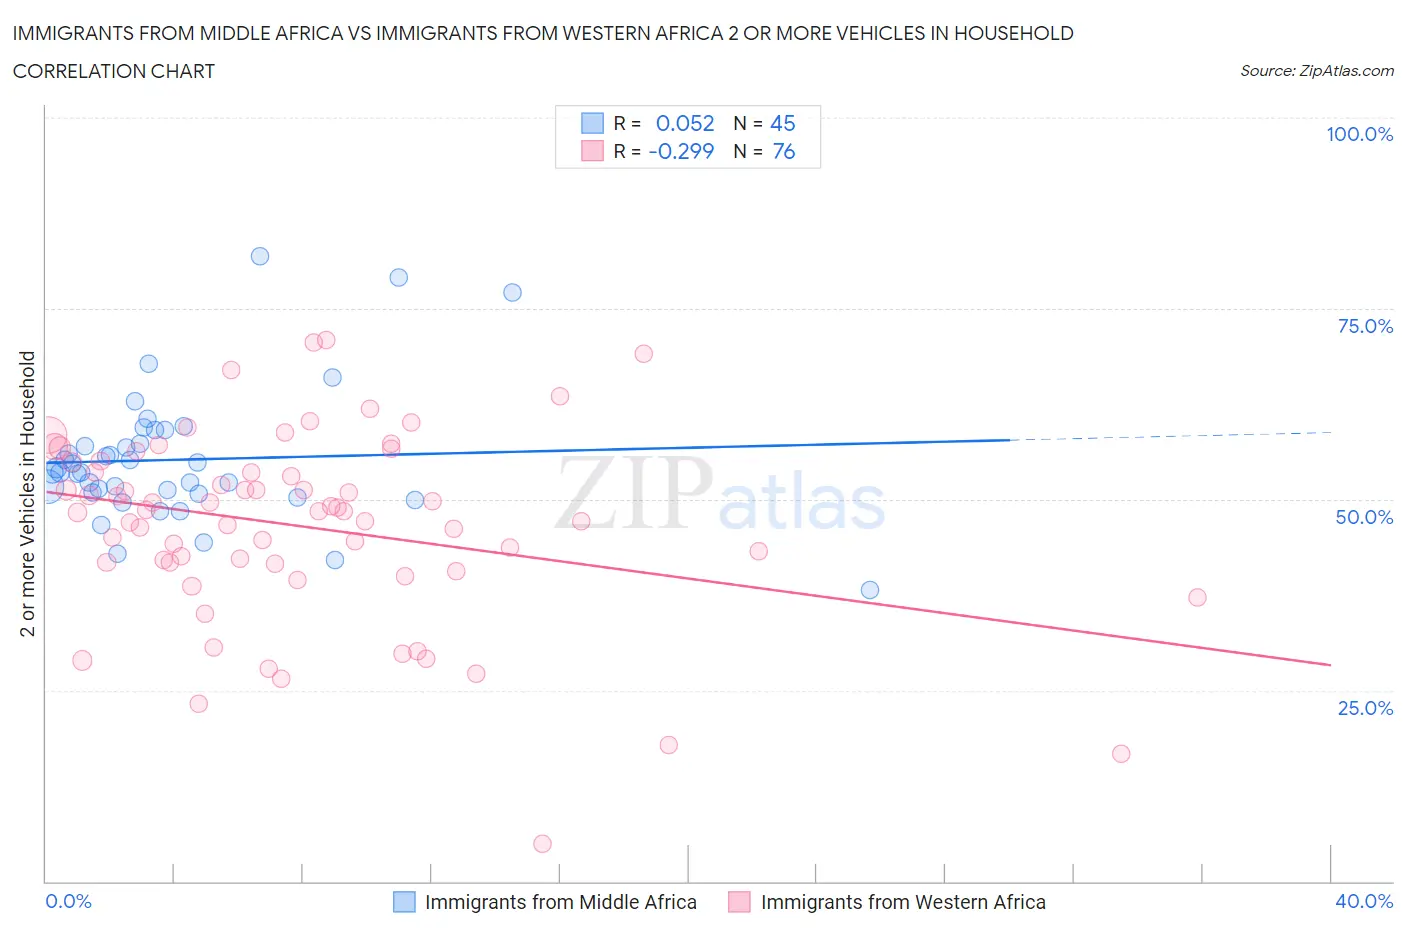 Immigrants from Middle Africa vs Immigrants from Western Africa 2 or more Vehicles in Household